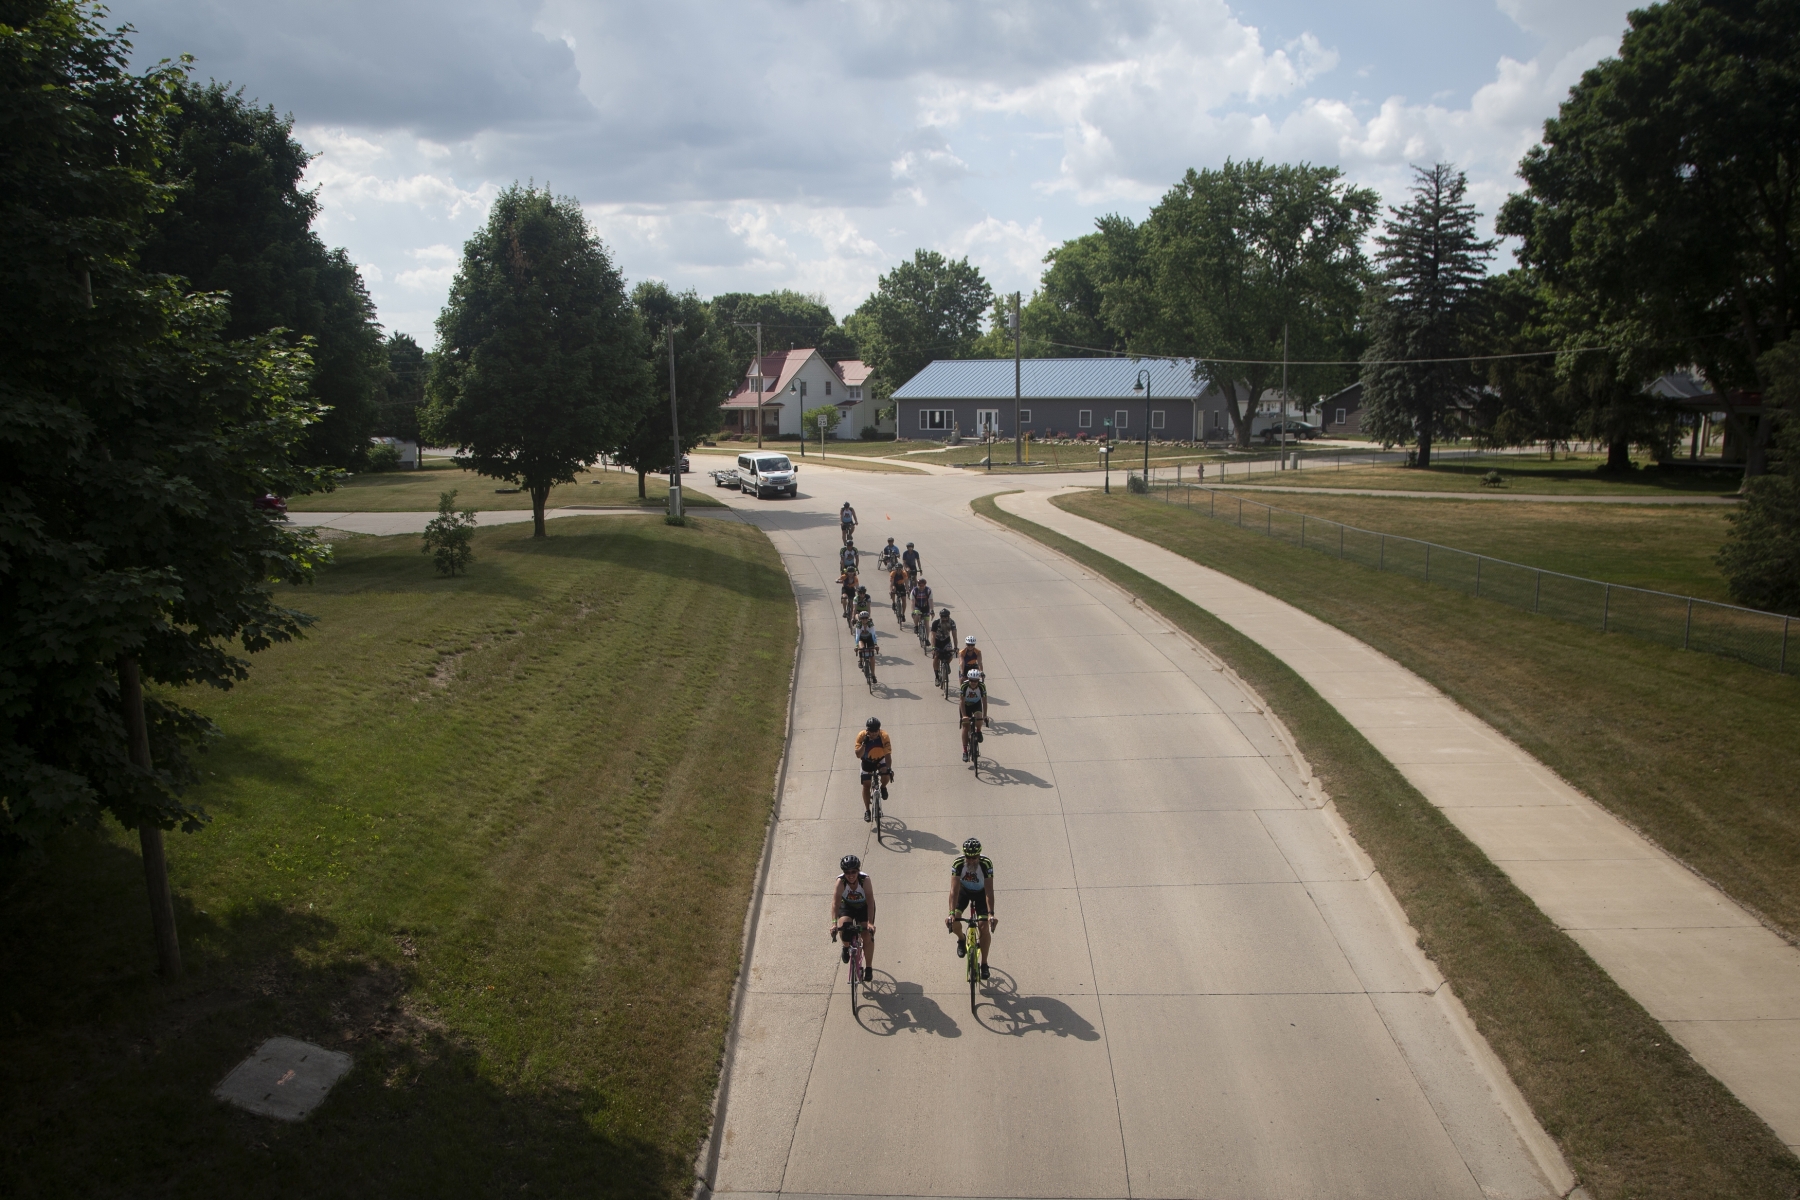 Cyclists leave Central City during the RAGBRAI route inspection ride on Thursday, June 10, 2021. Day 5 of the route brings riders from Waterloo through the meeting town of Center Point to Anamosa. Riders also have the option of doing the Karras loop, bring the days total mileage to about 110.